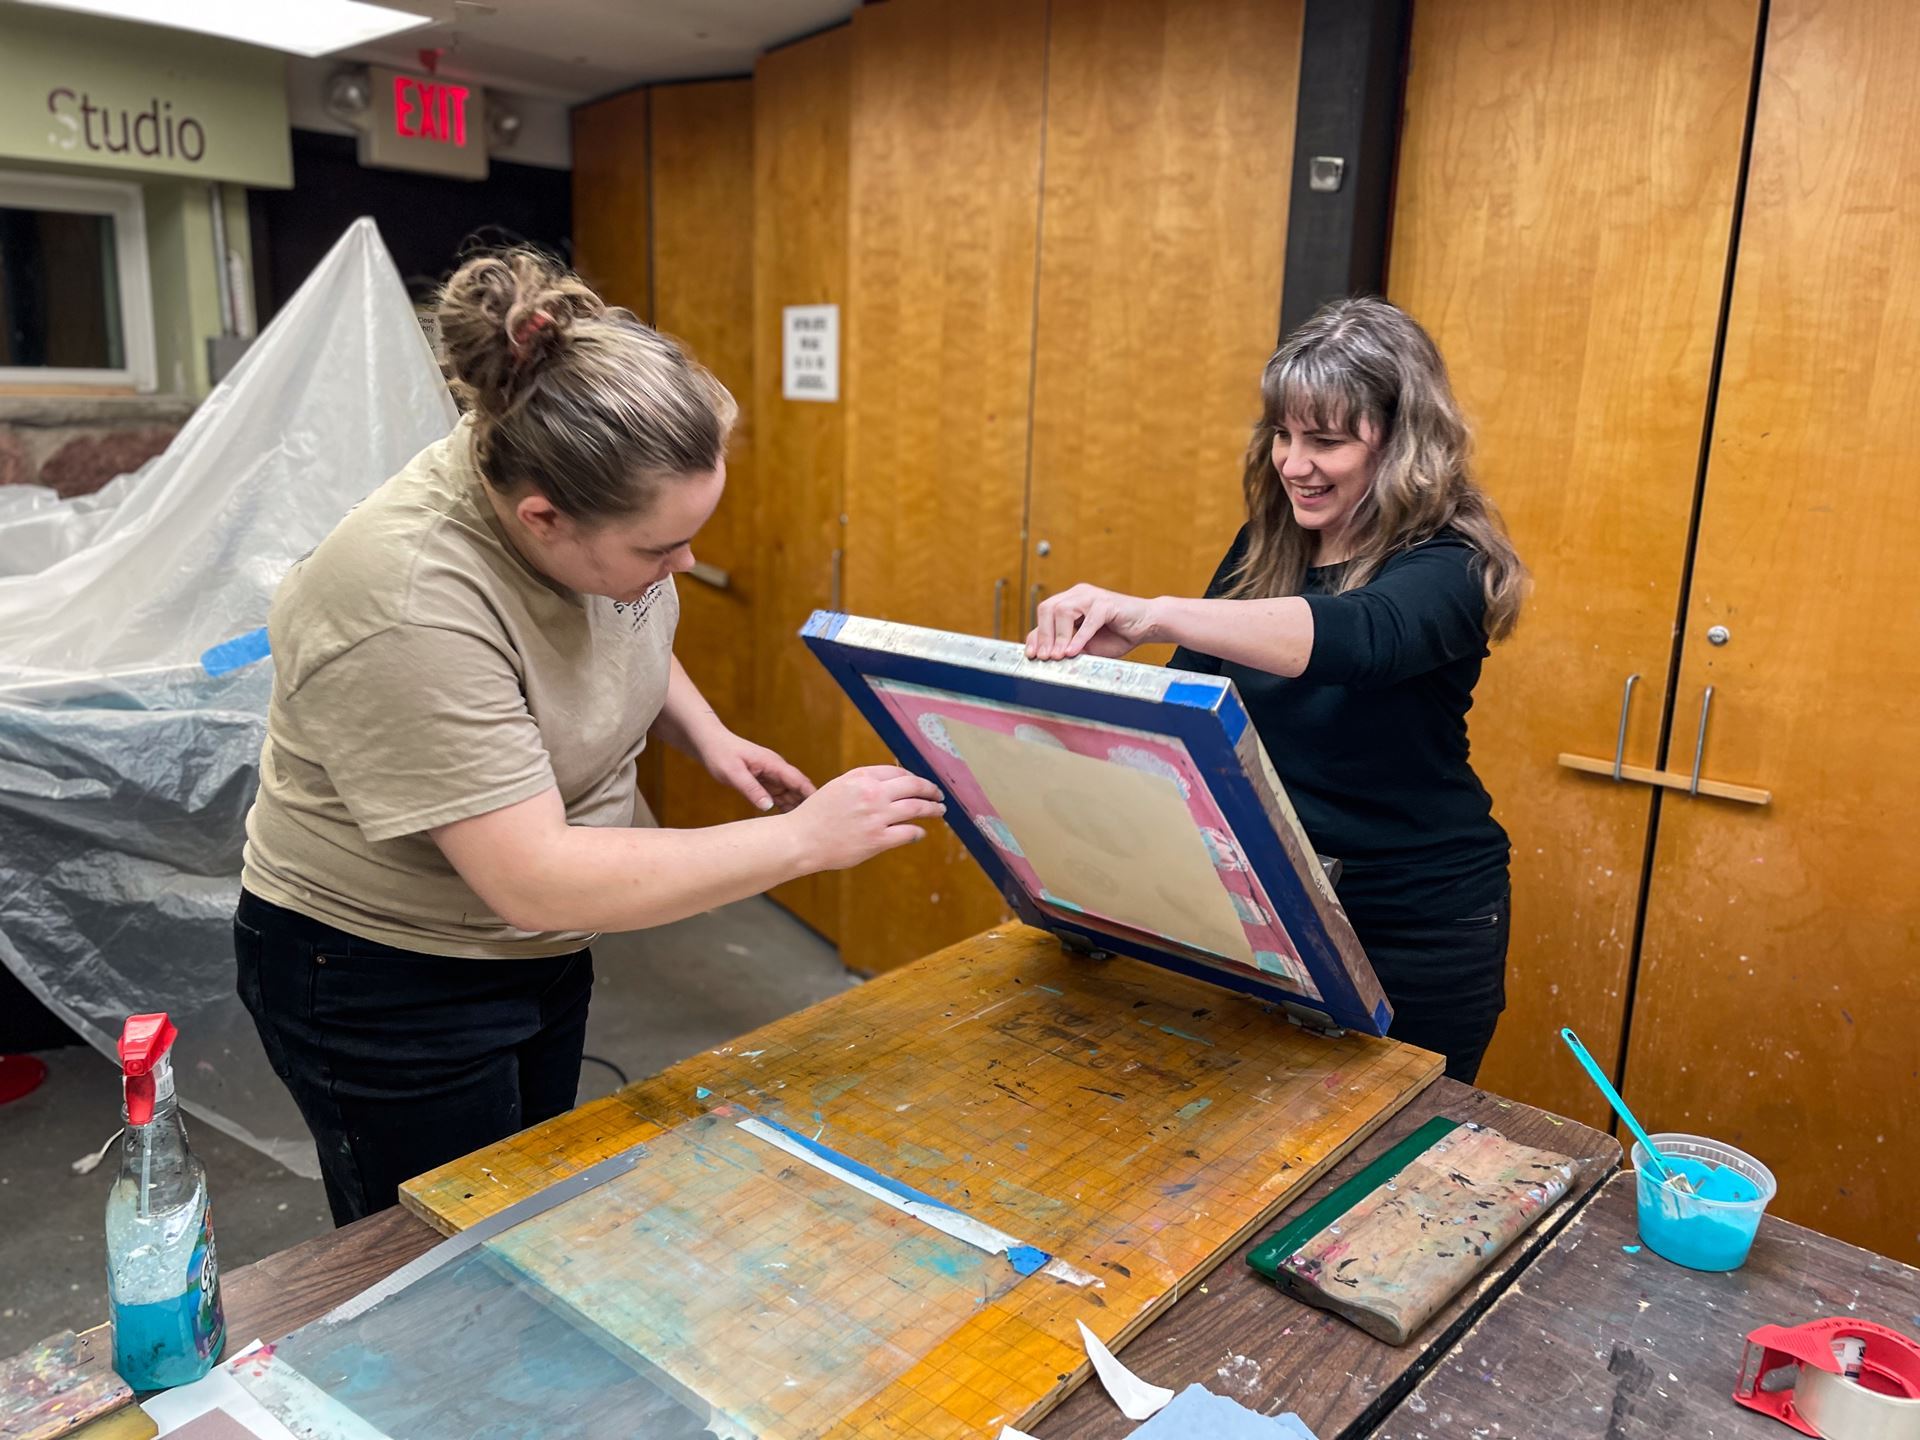 Kath instructing an artist on how to screen print.